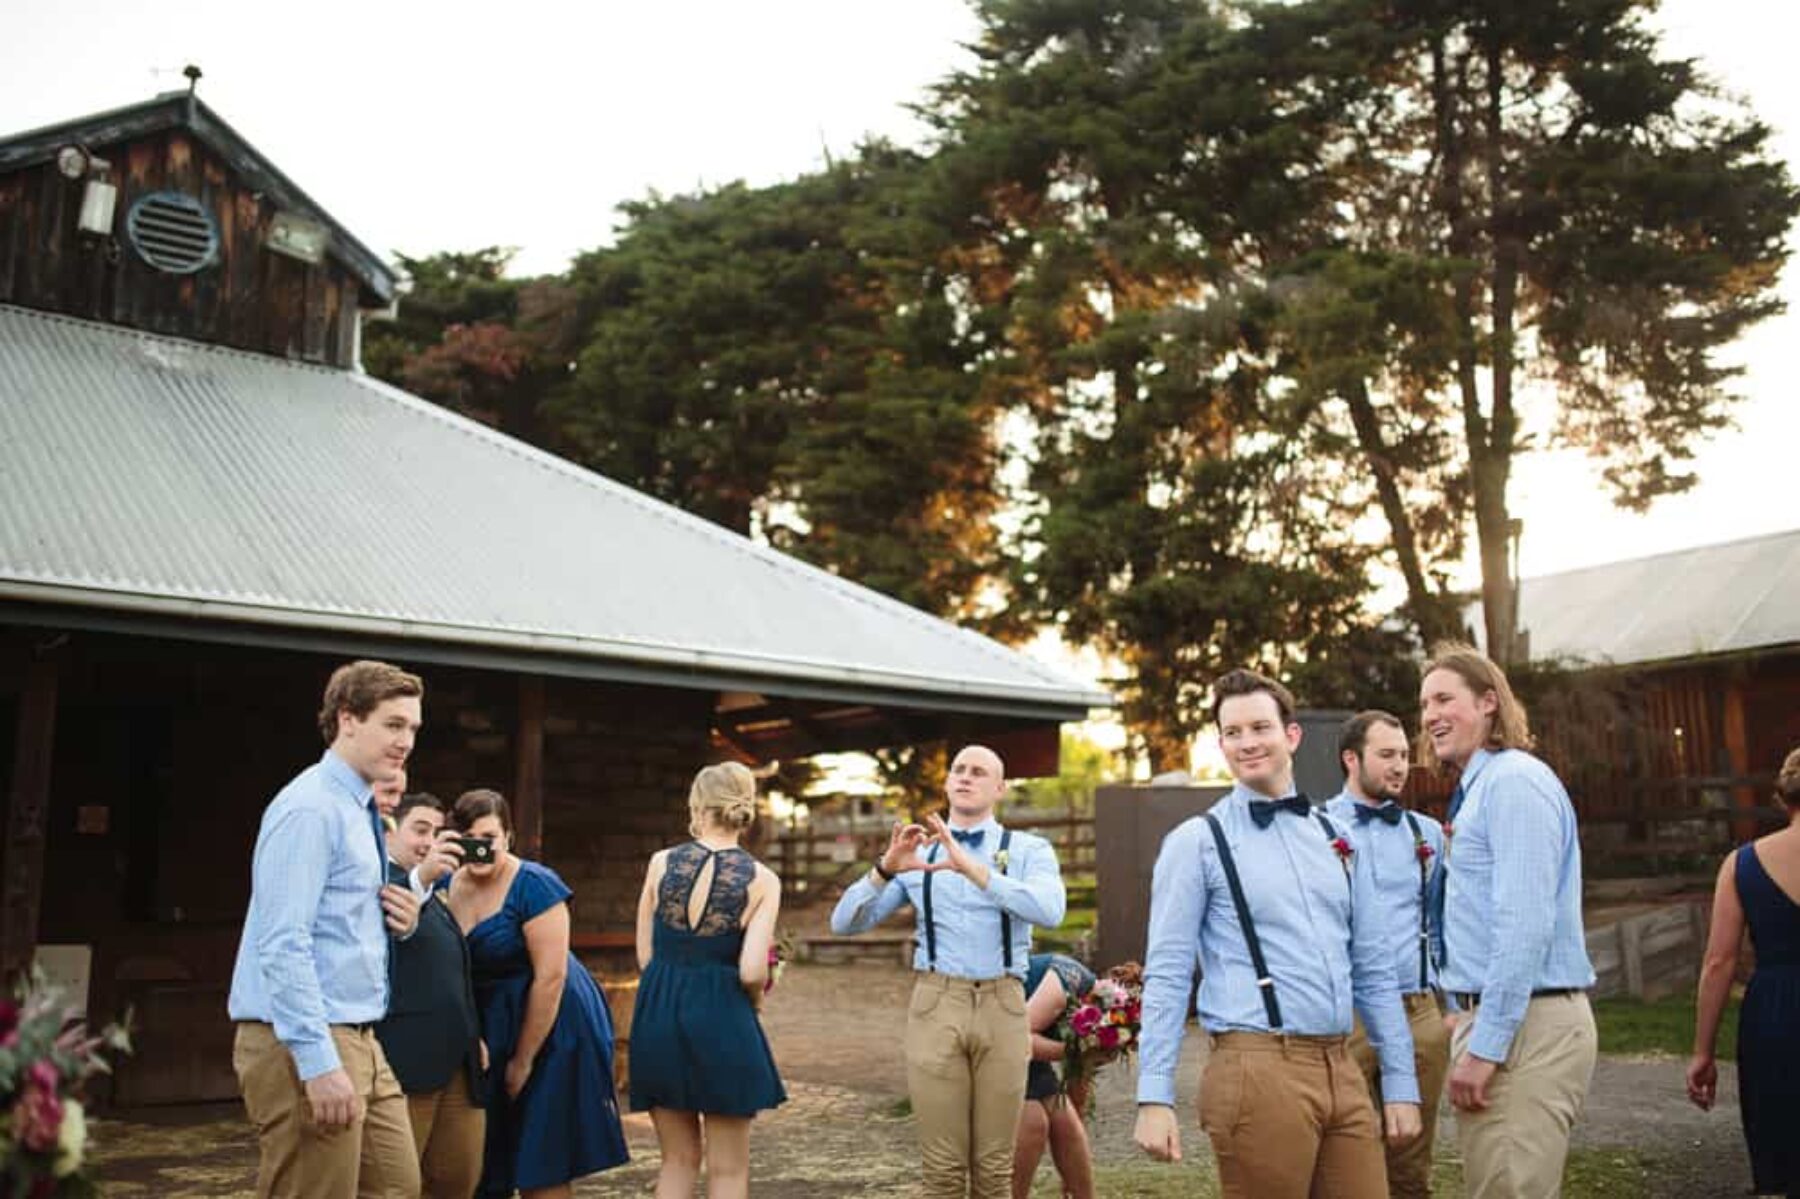 Collingwood Children's Farm Wedding / Photography by Pierre Curry